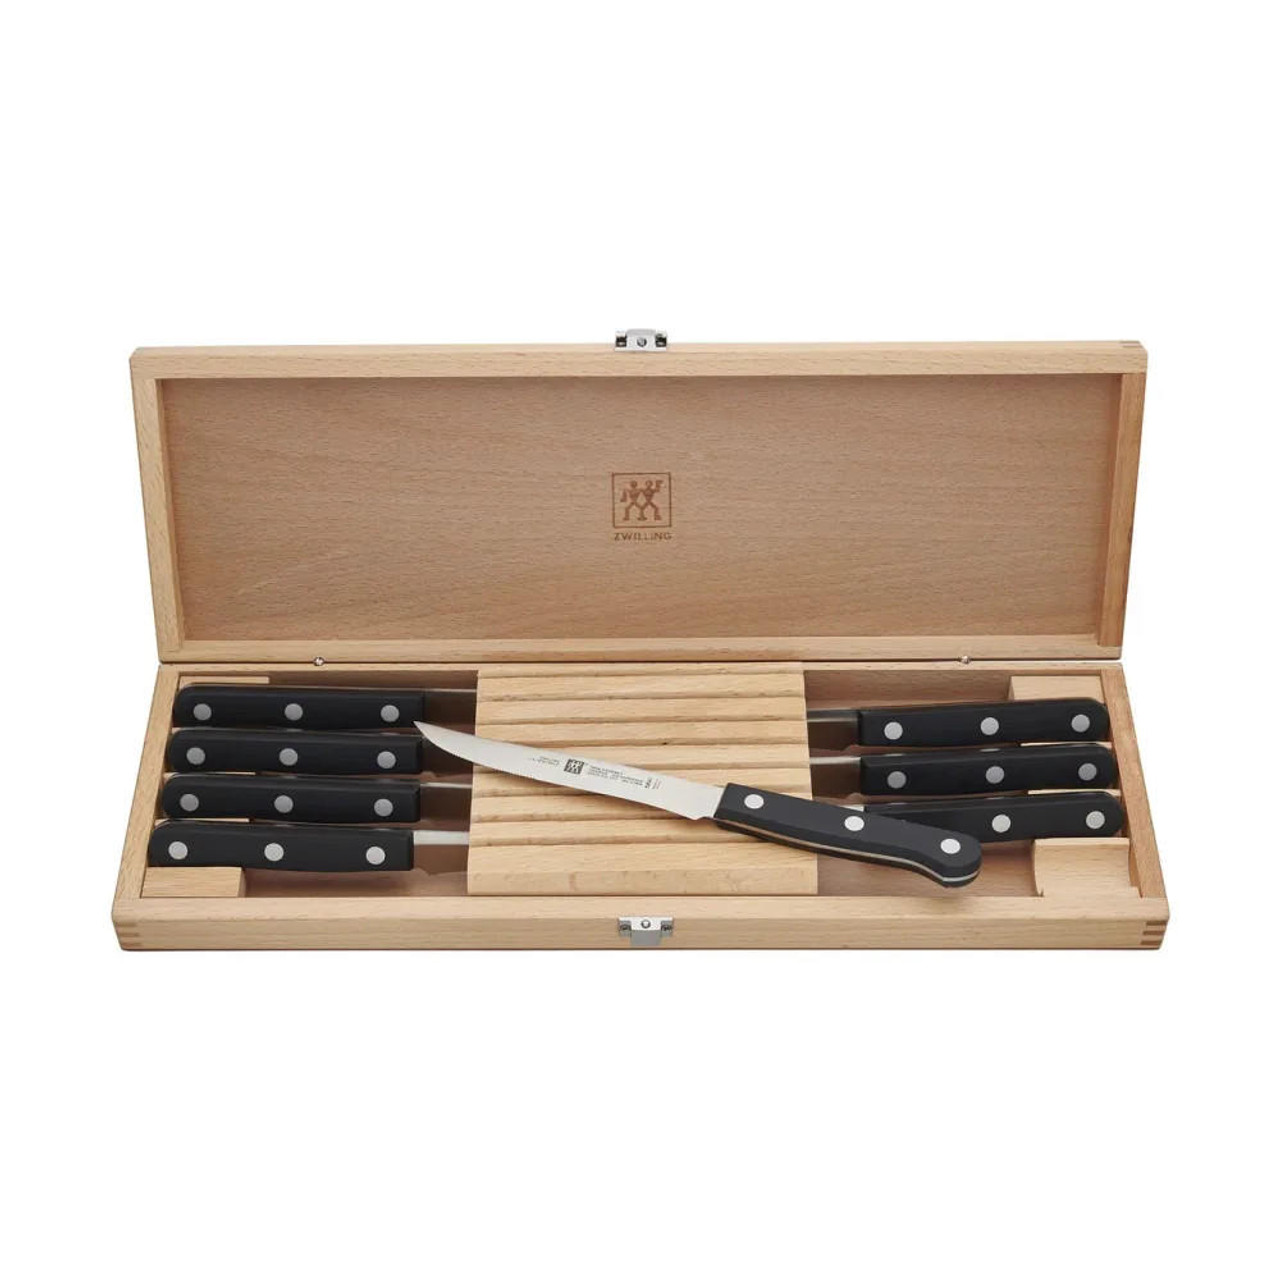 ZWILLING  Zwilling Gourmet 8 Piece Steak Knife Set with Wood Presentation Box 